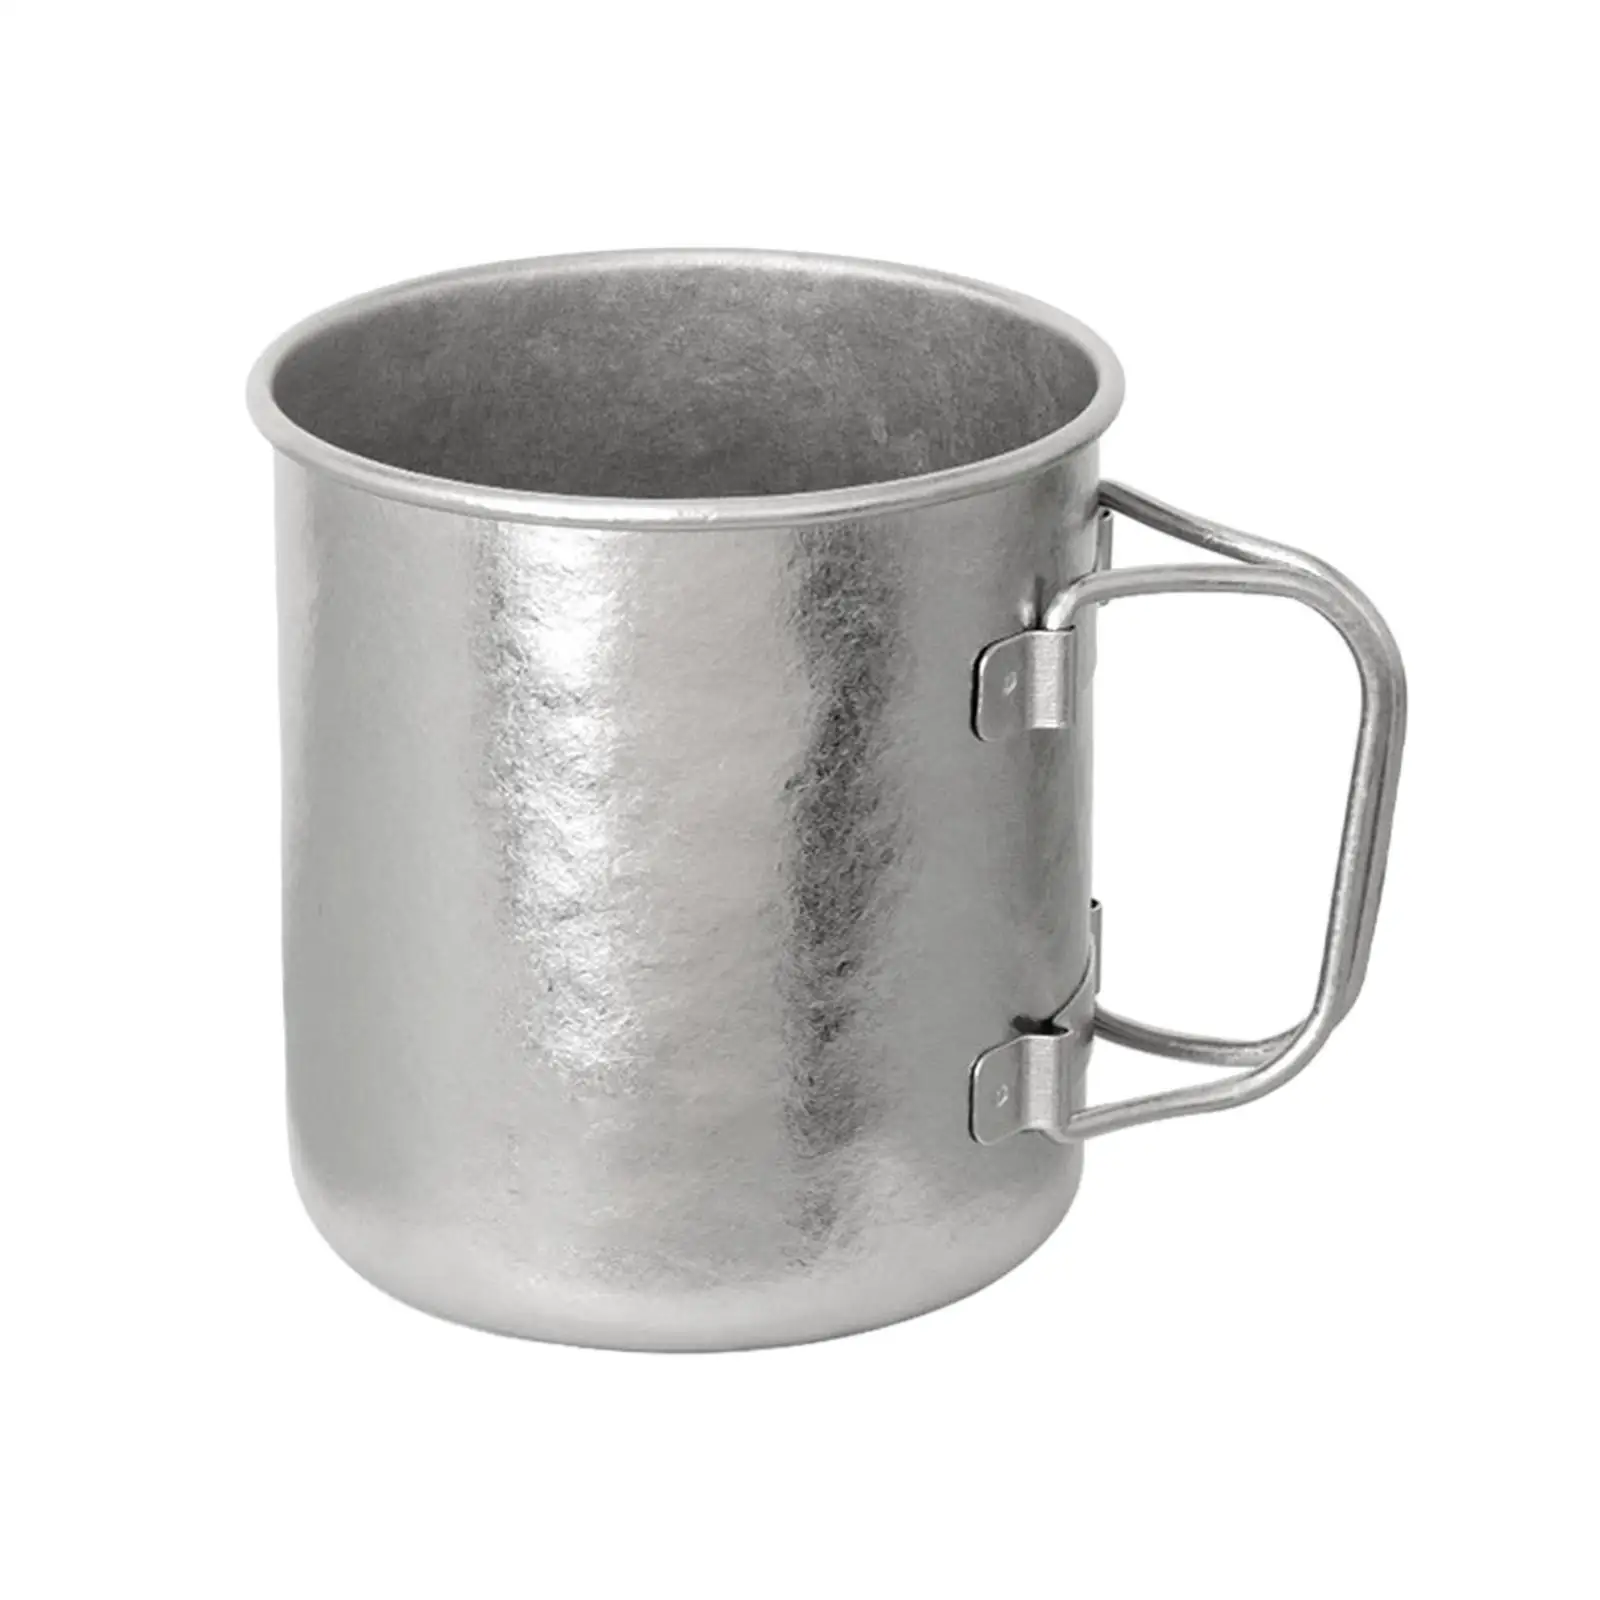 Lightweight Titanium 450ml Cup Camping Mug Foldable Handle Tea Water Cup Tableware for Campfire Outdoor Hiking Drinking